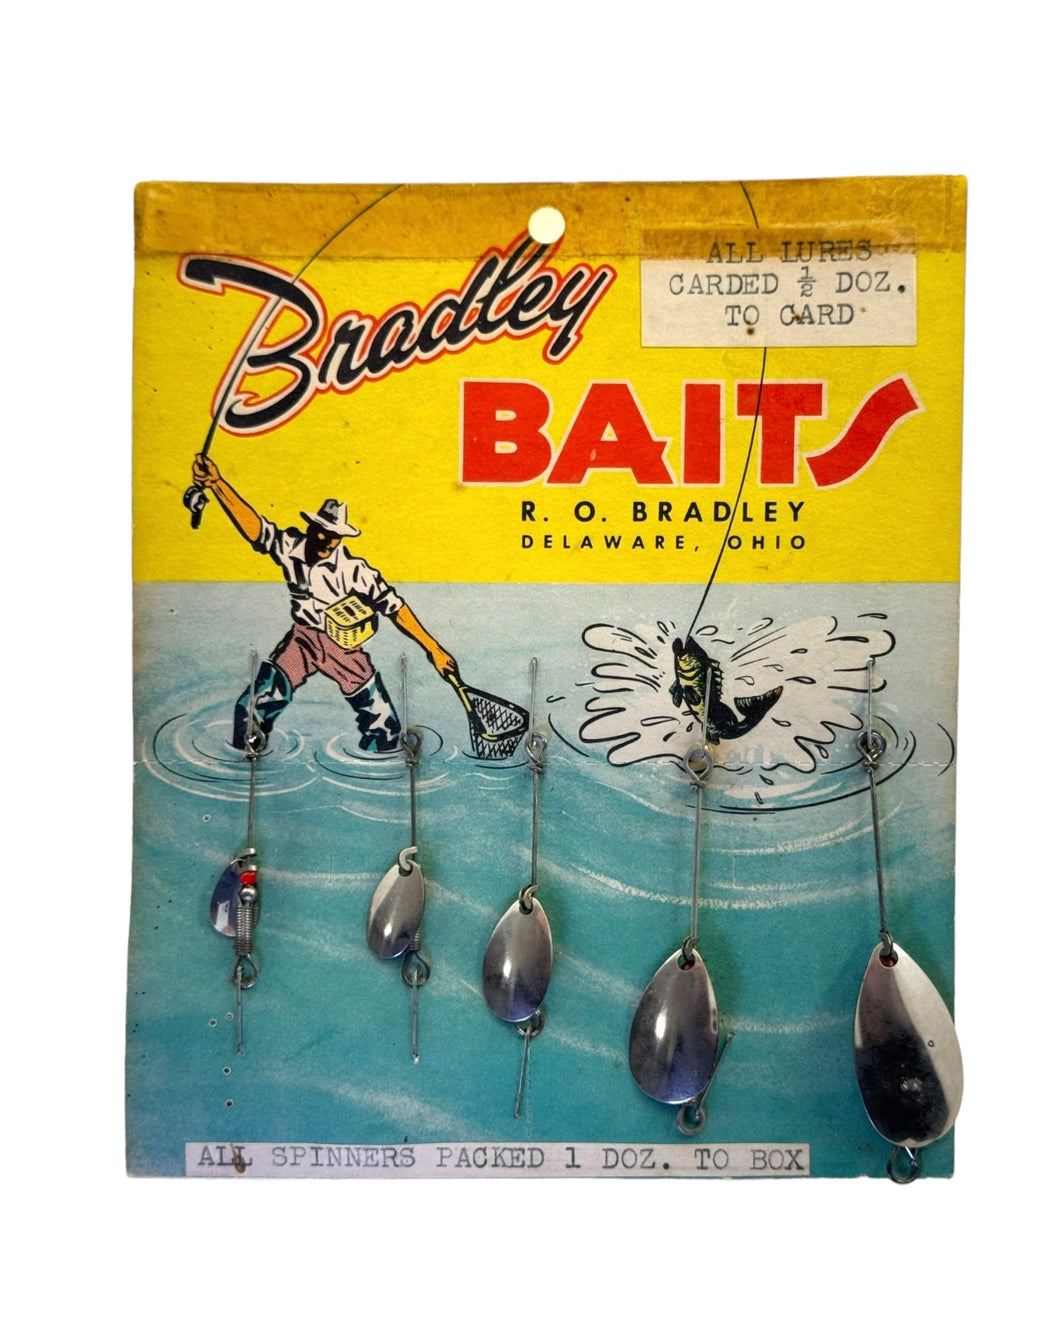 BRADLEY BAITS of Ohio Retro Graphics SPINNERBAIT Card with Vintage Metal Lures. Card Features Angler with Fishing Creel & Jumping Bass.